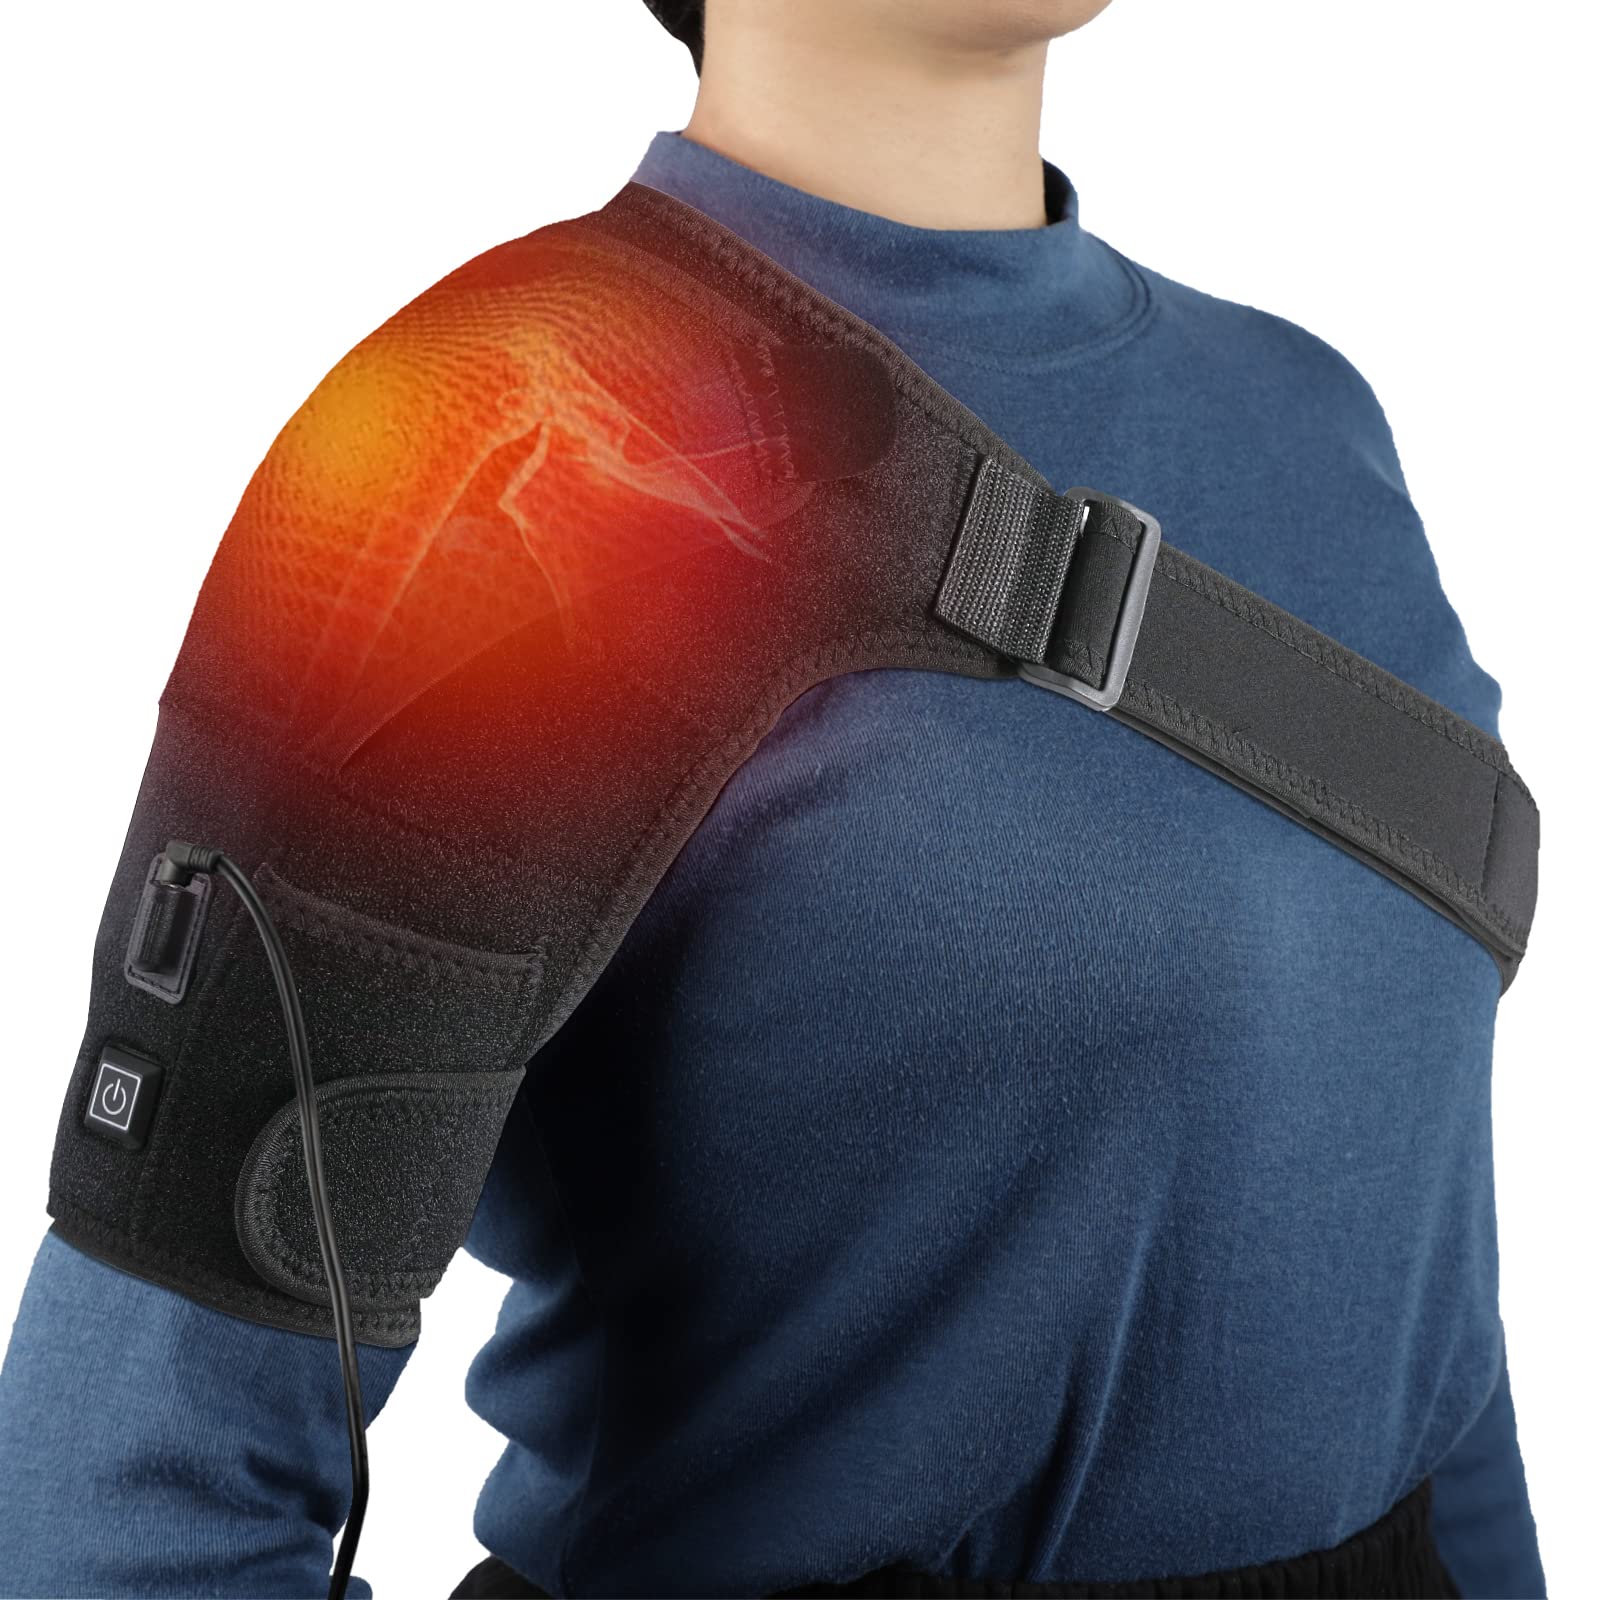 Heated Shoulder Brace, Shoulder Heating Pads with Adjustable 3 Heat  Settings Hot Cold Therapy, Shoulder Compression